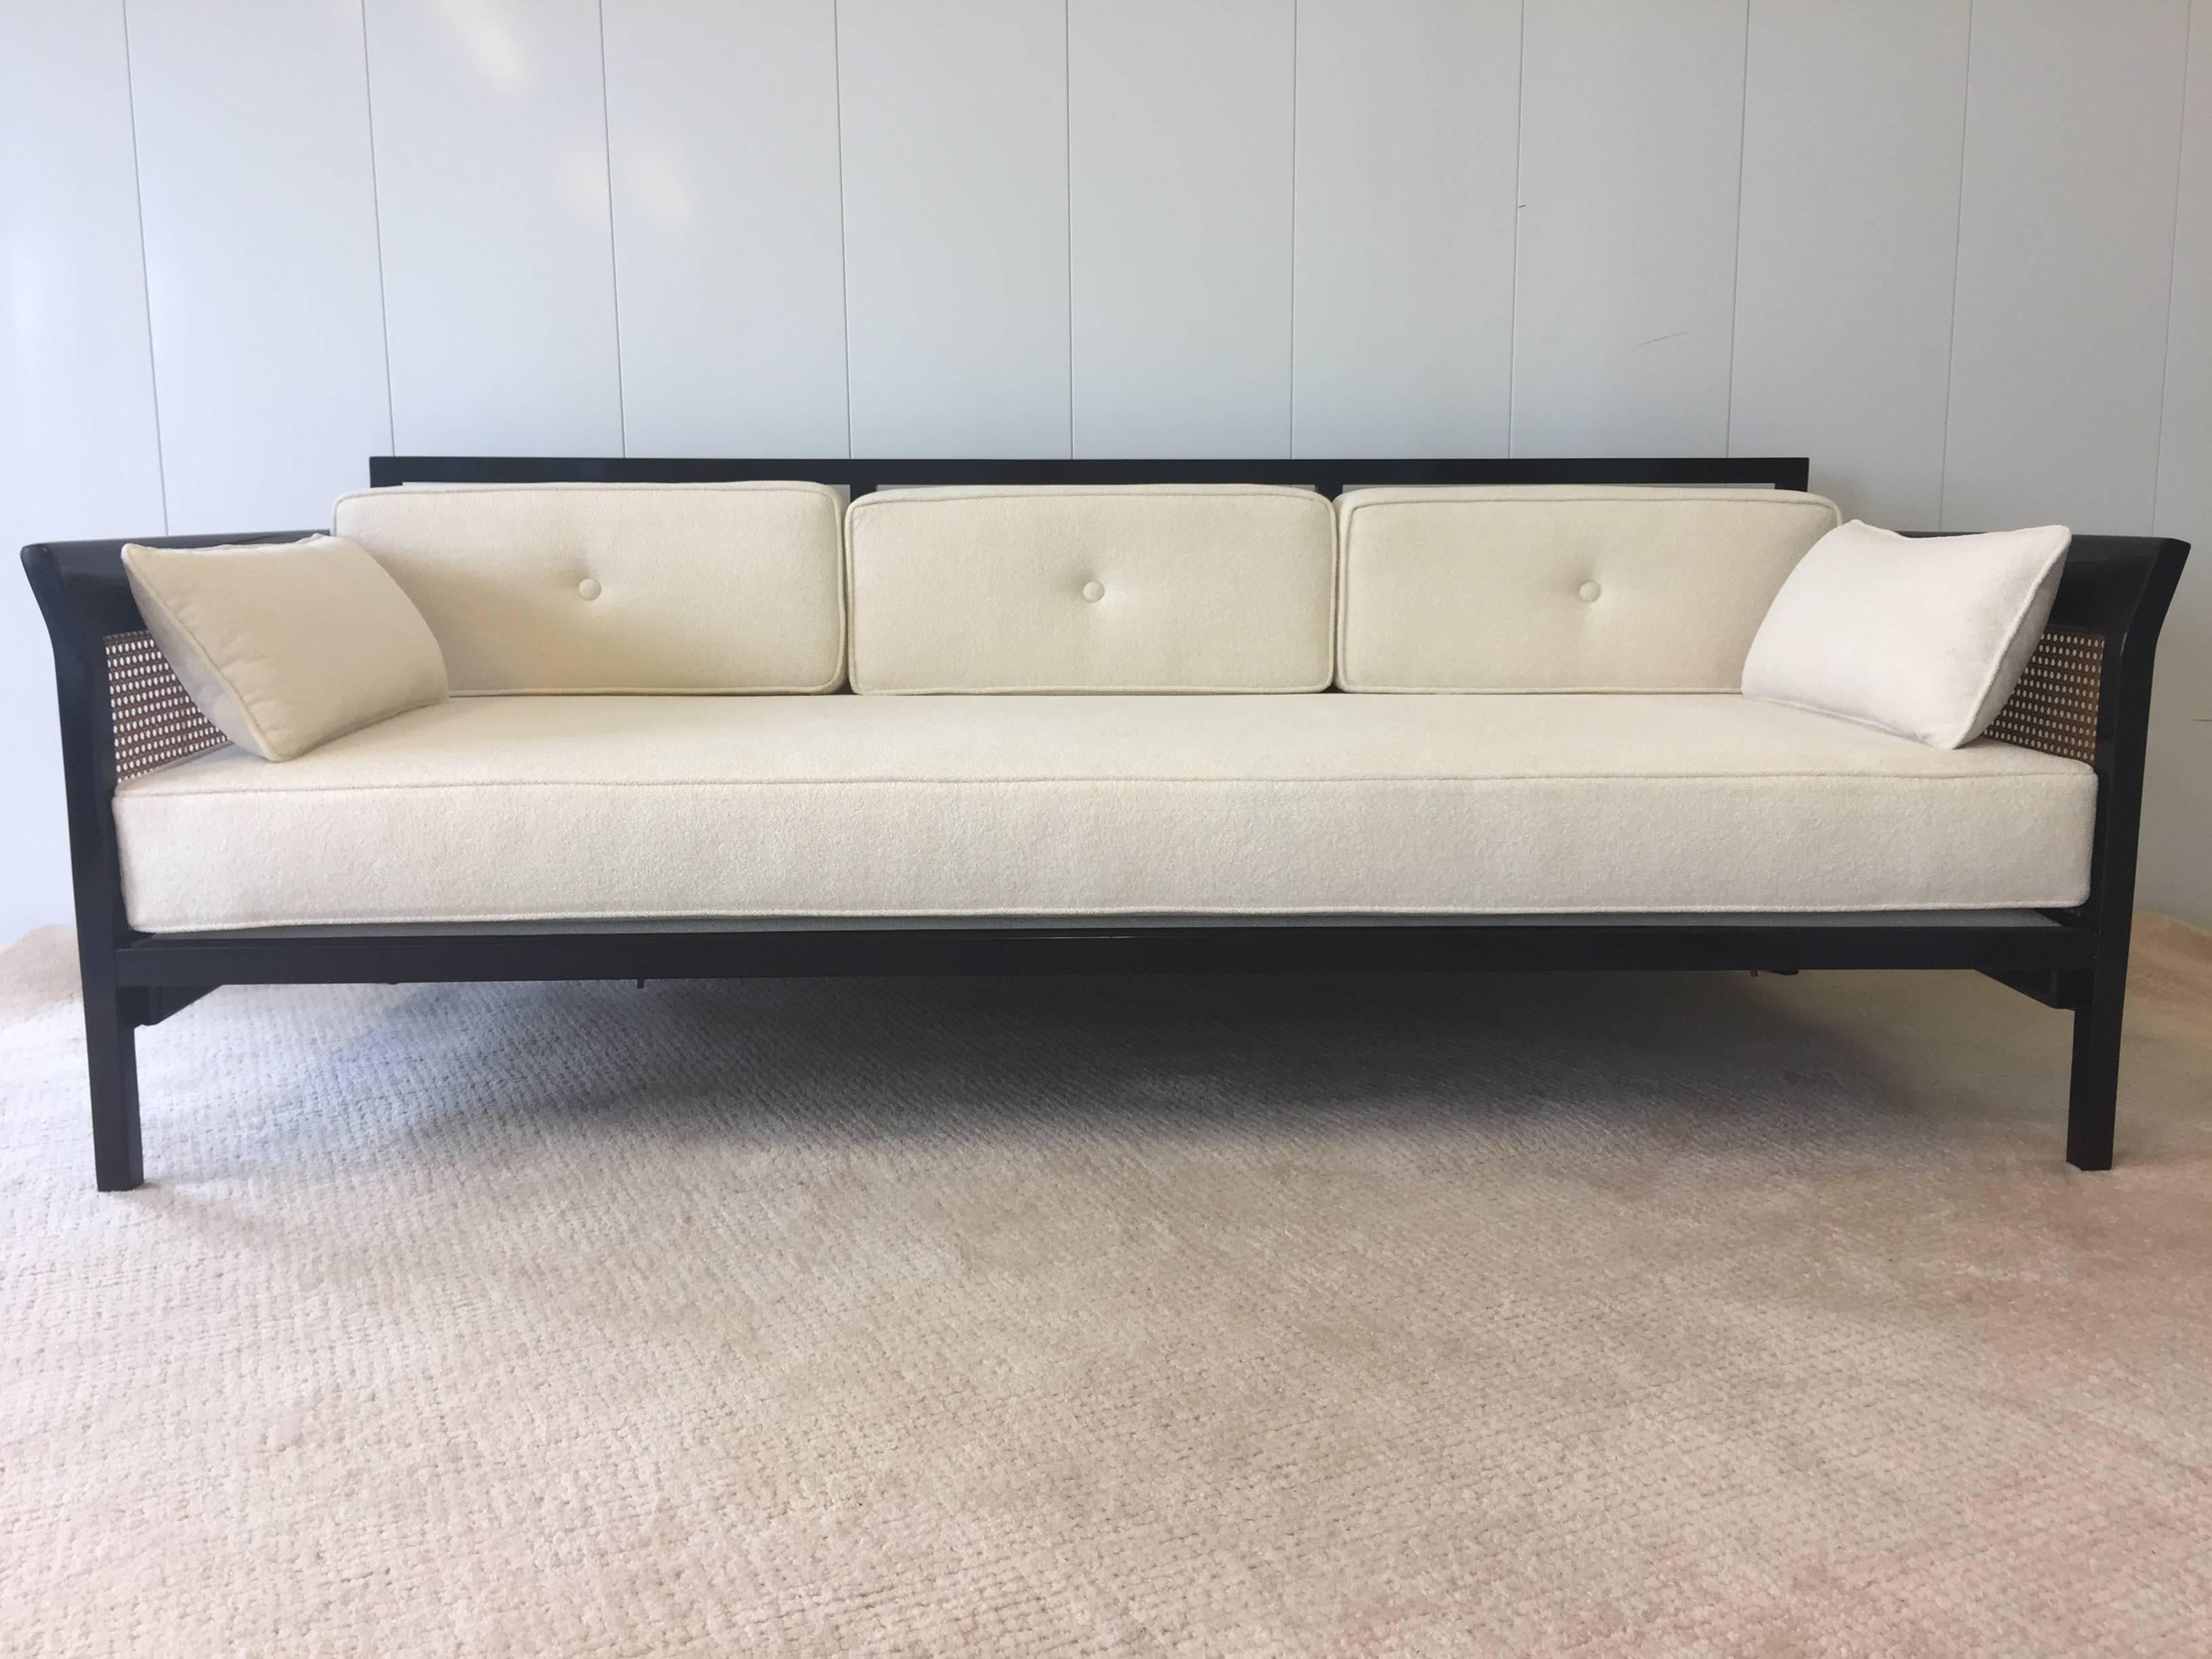 Edward Wormley sofa/daybed elegant dark walnut cane side, chenille fabric,exceptional quality and workmanship , heavy constructed steel frame base. Depth to back cushion is 26